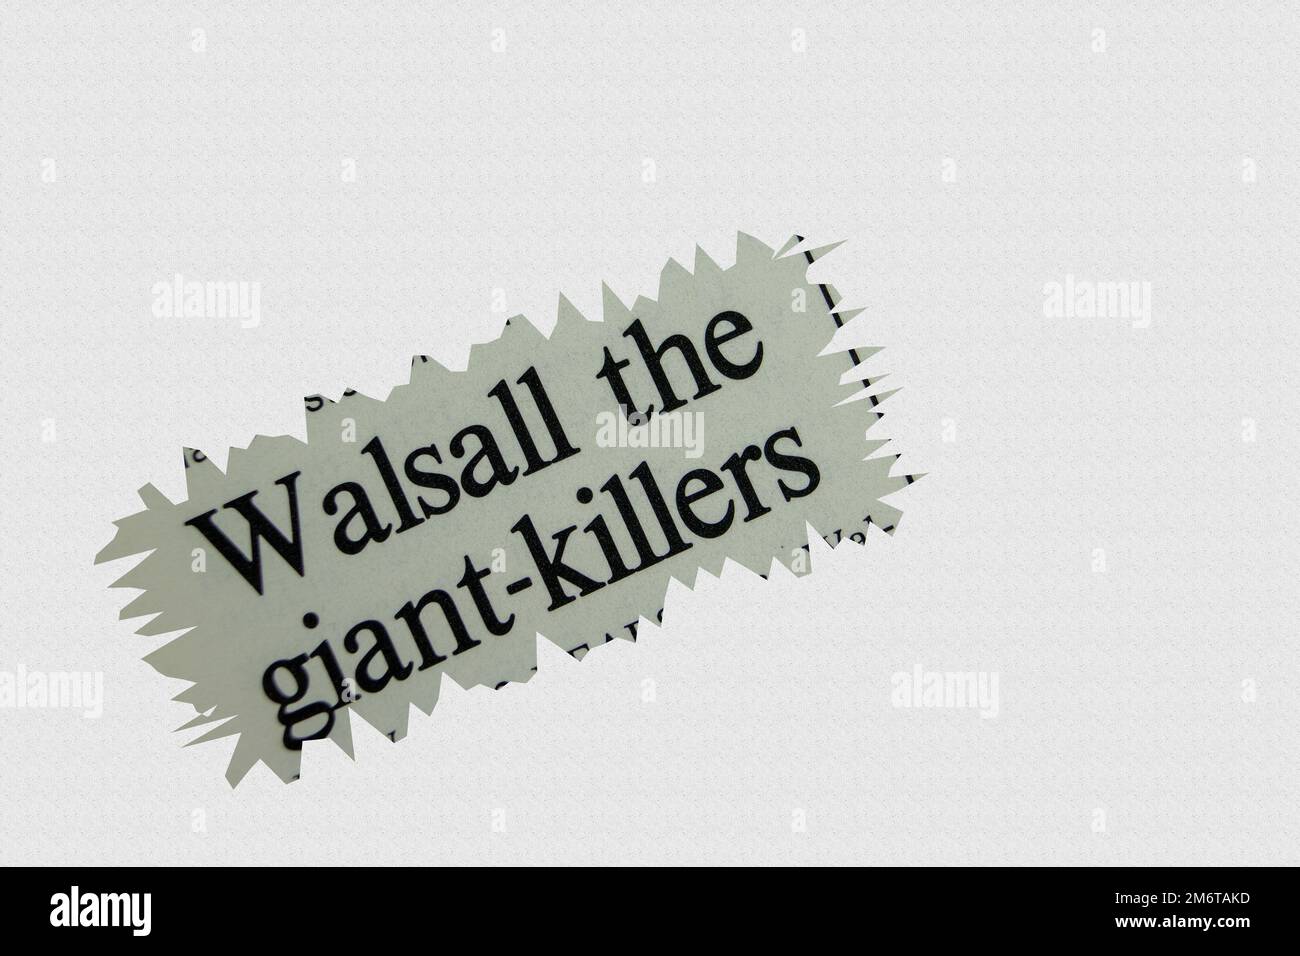 news story from 1975 newspaper headline article title - Walsall the giant-killers Stock Photo